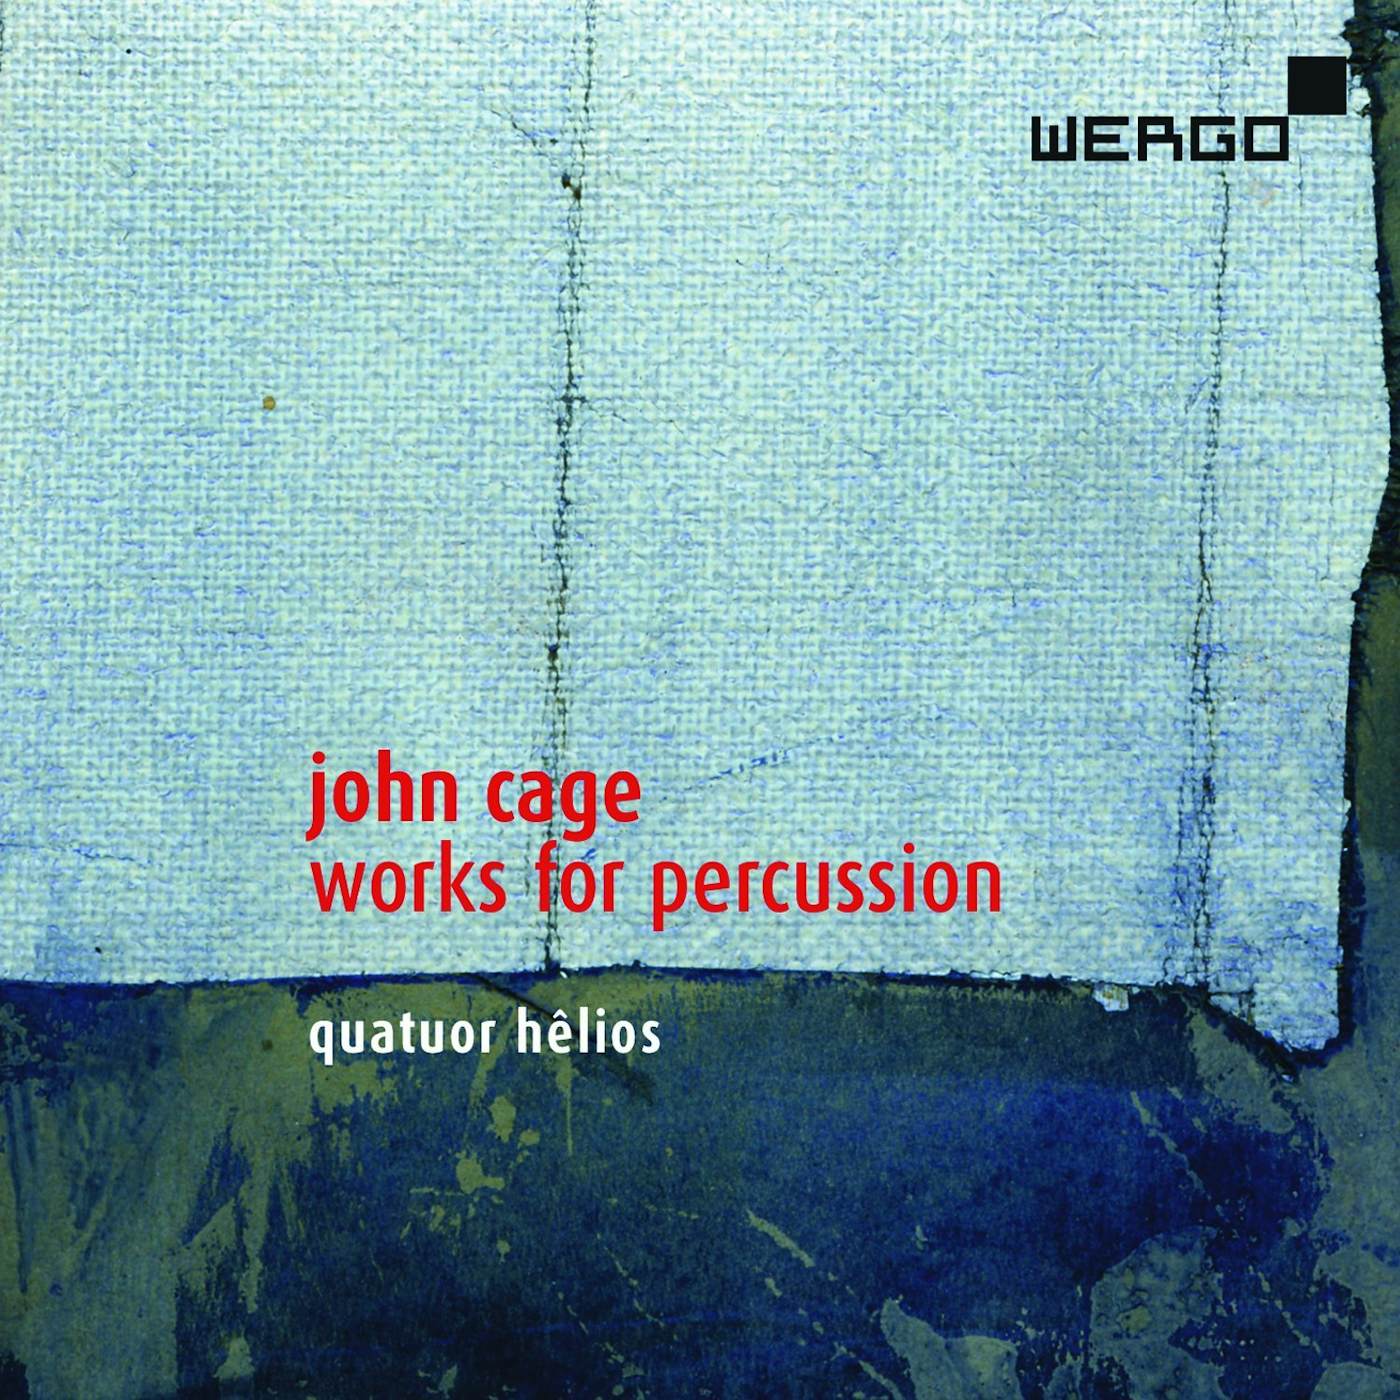 John Cage WORKS FOR PERCUSSION CD